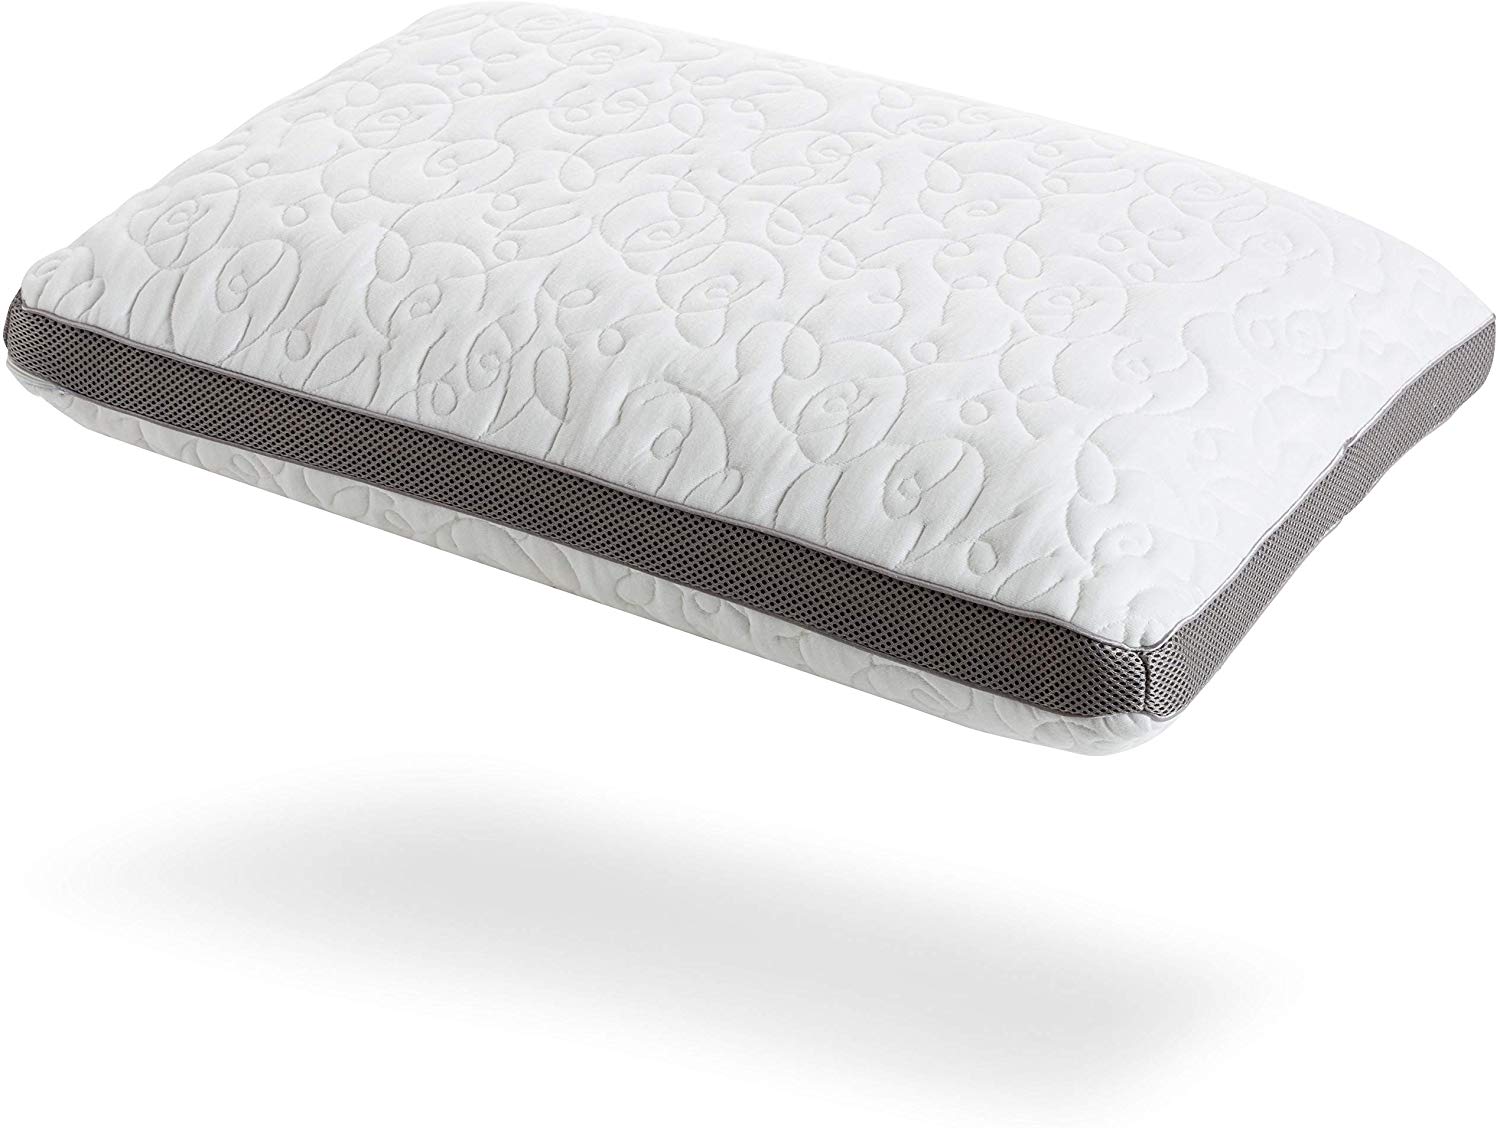 Perfect Cloud Double Airflow Memory Foam Pillow : Best Rated Luxury Cooling Top Pillows for Sleeping